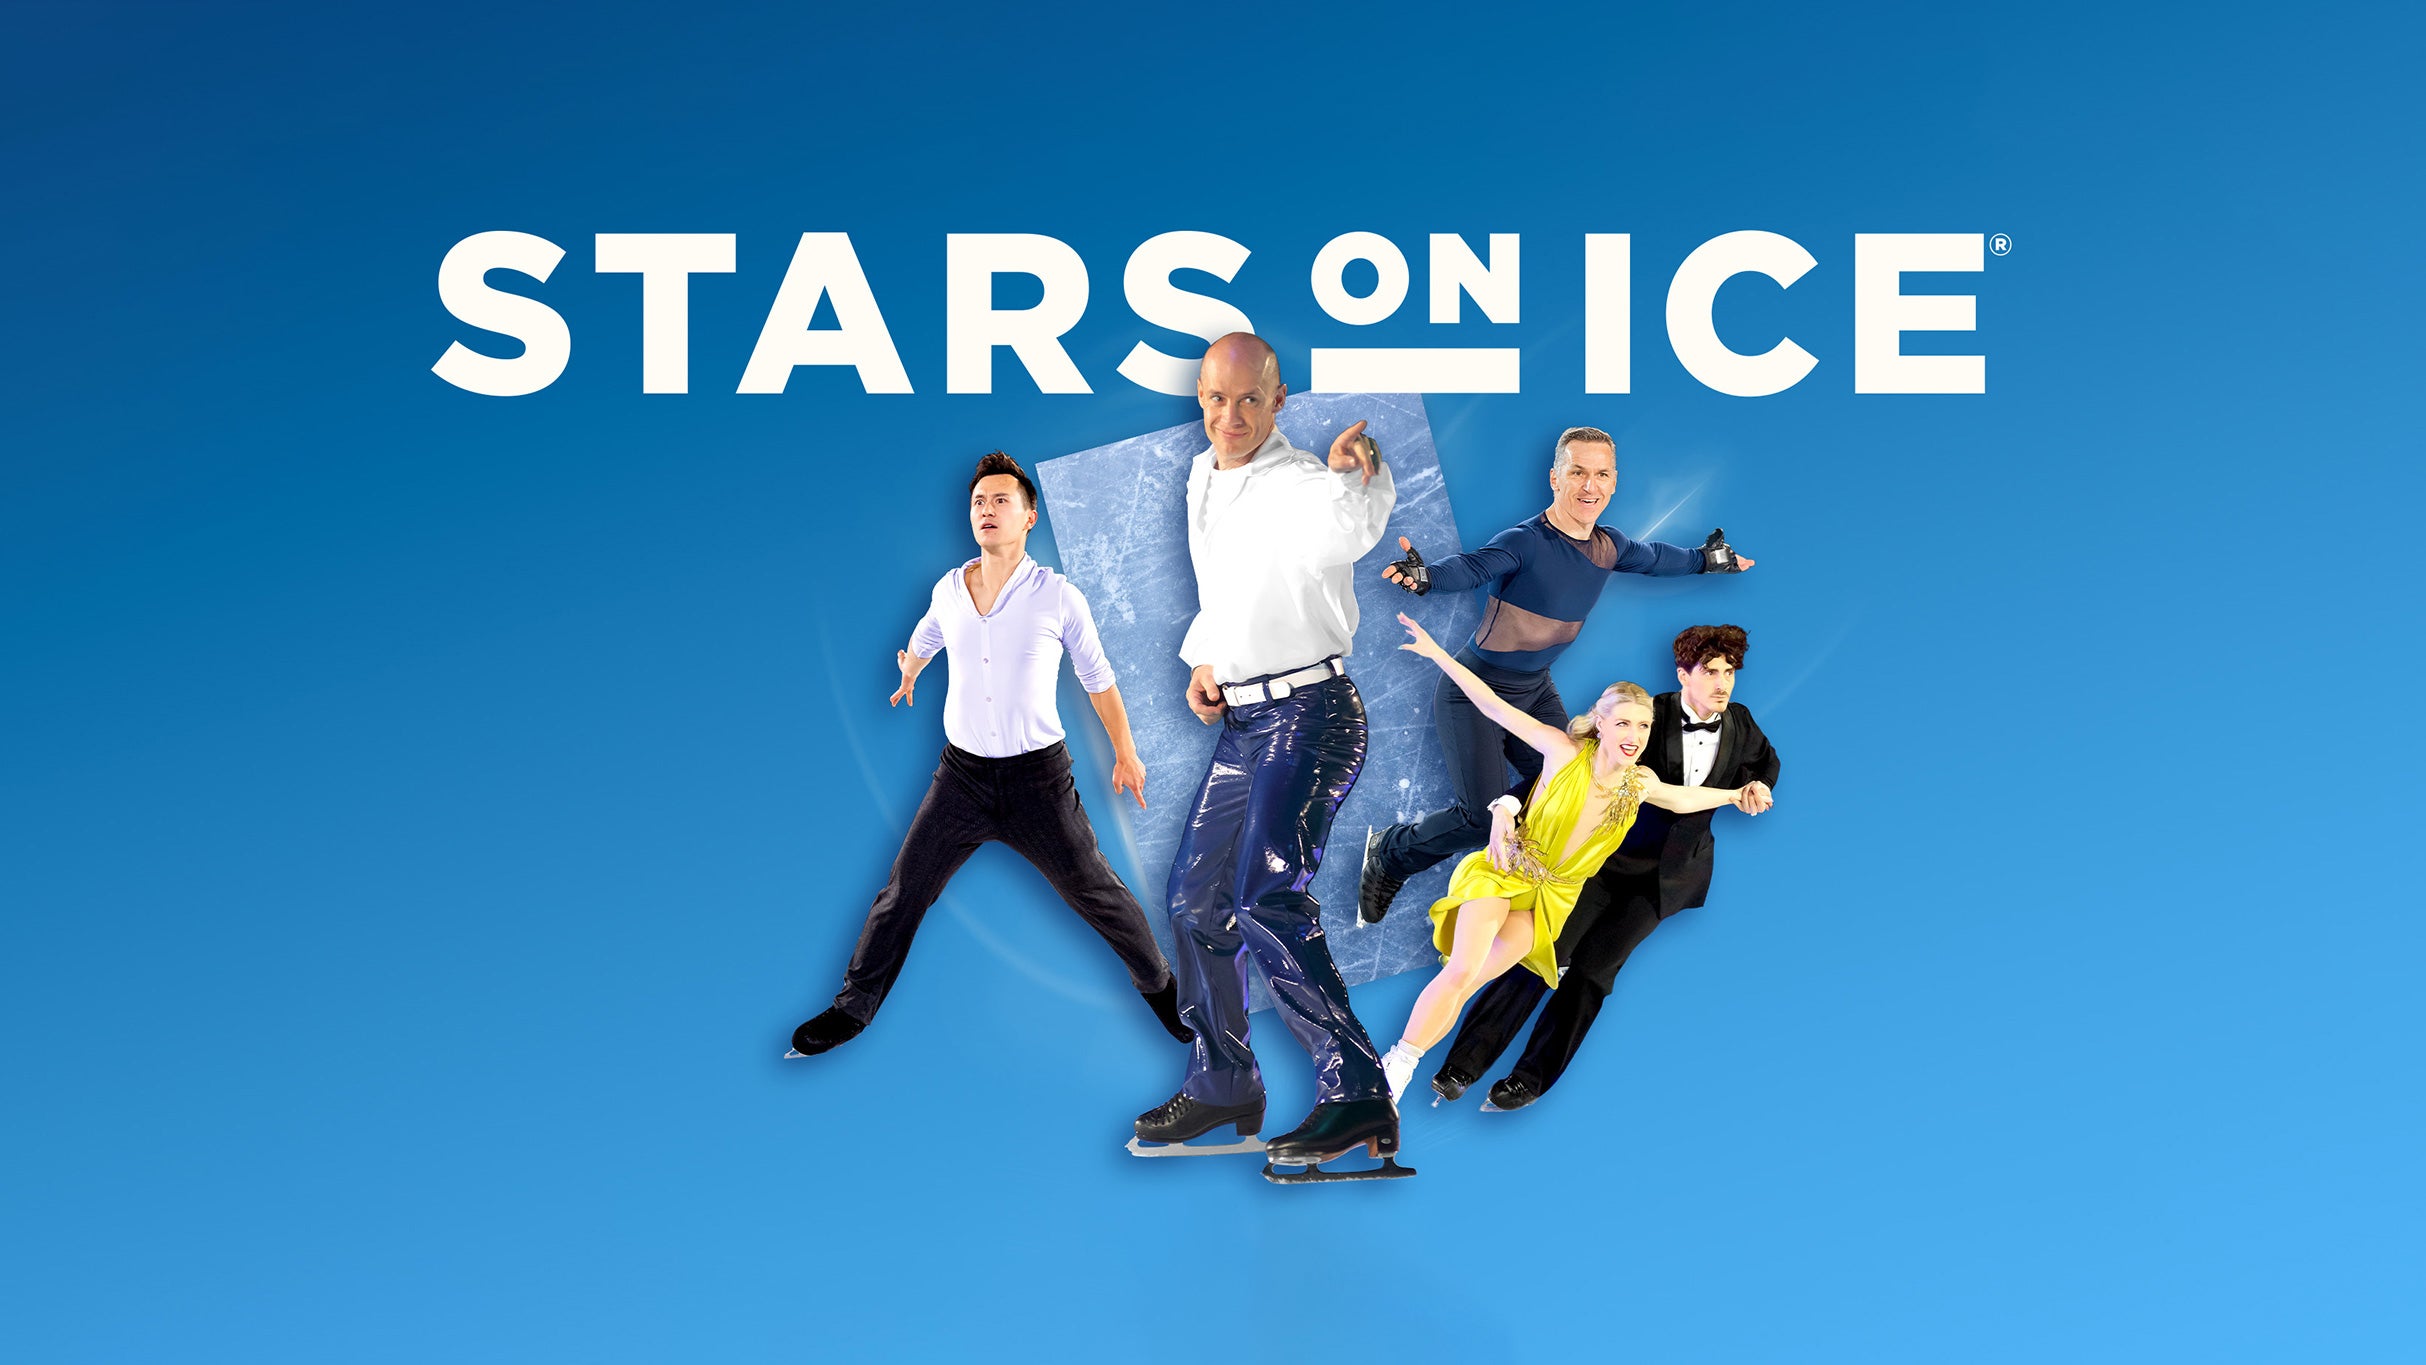 Stars on Ice - Canada in Vancouver promo photo for Soi Vip presale offer code